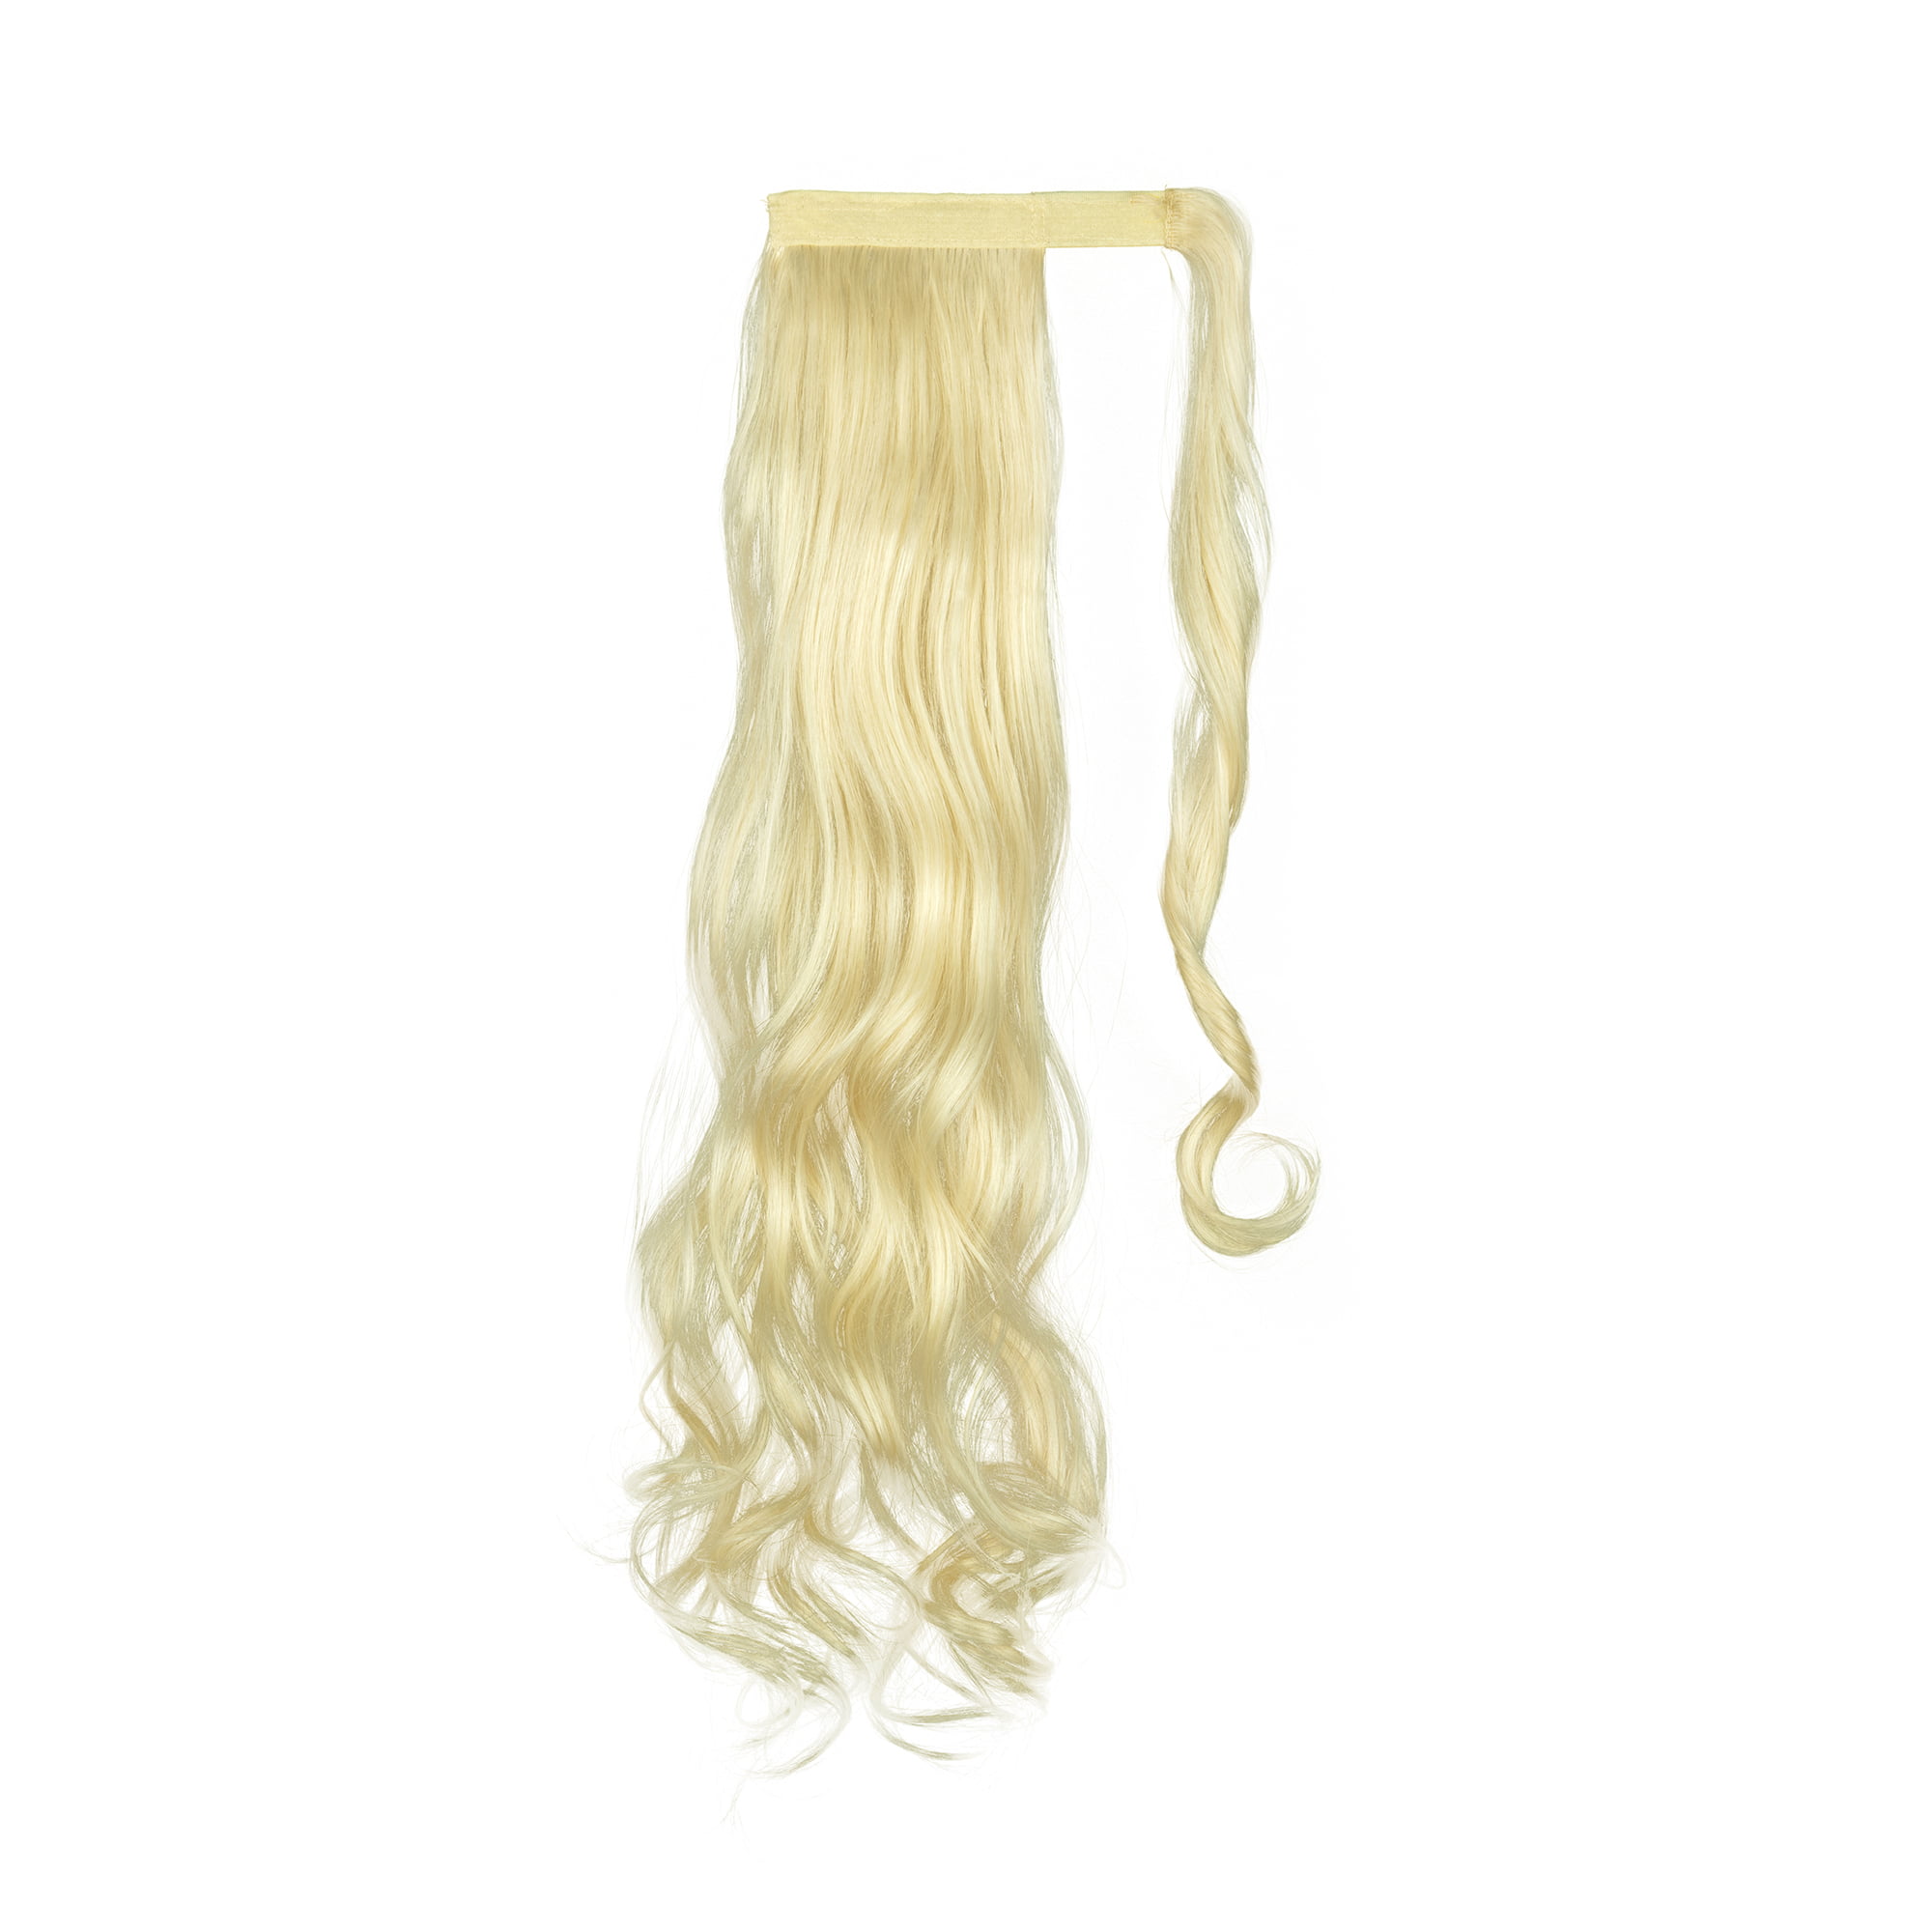 New Arrival】10inch-30inch Clip In Ponytail Hair !! Magic Paste